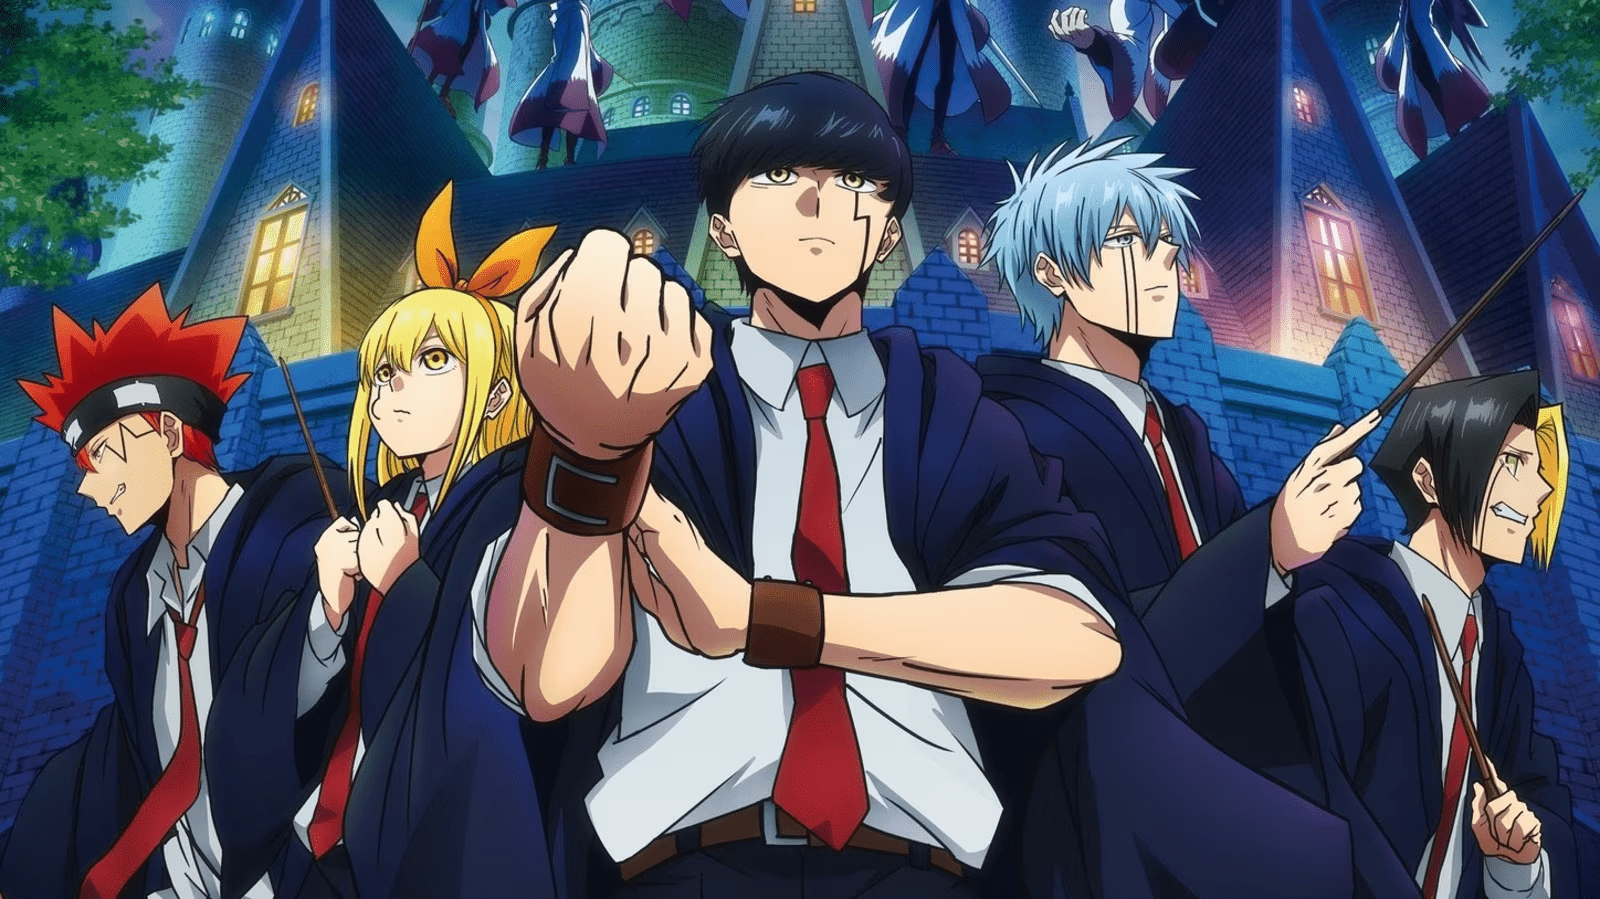 Mashle: Magic and Muscles brings high power to this season's fantasy anime!